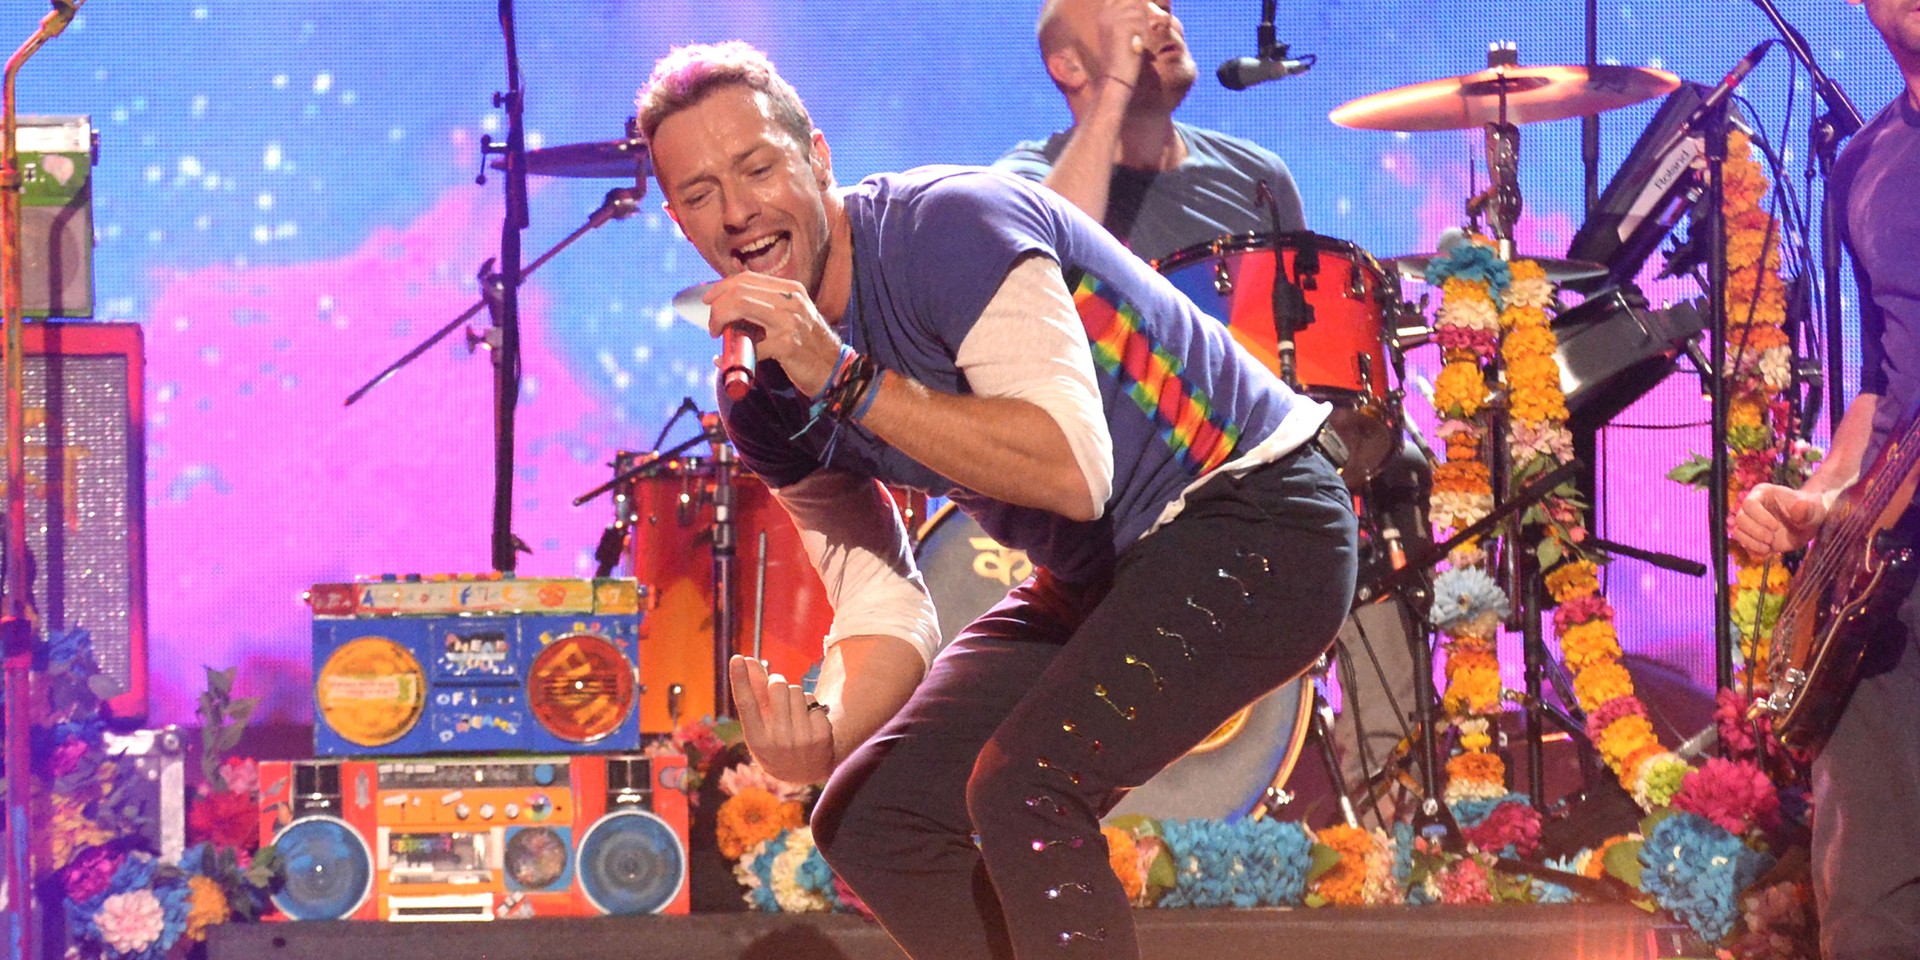 You might be able to choose a song Coldplay will play in Singapore